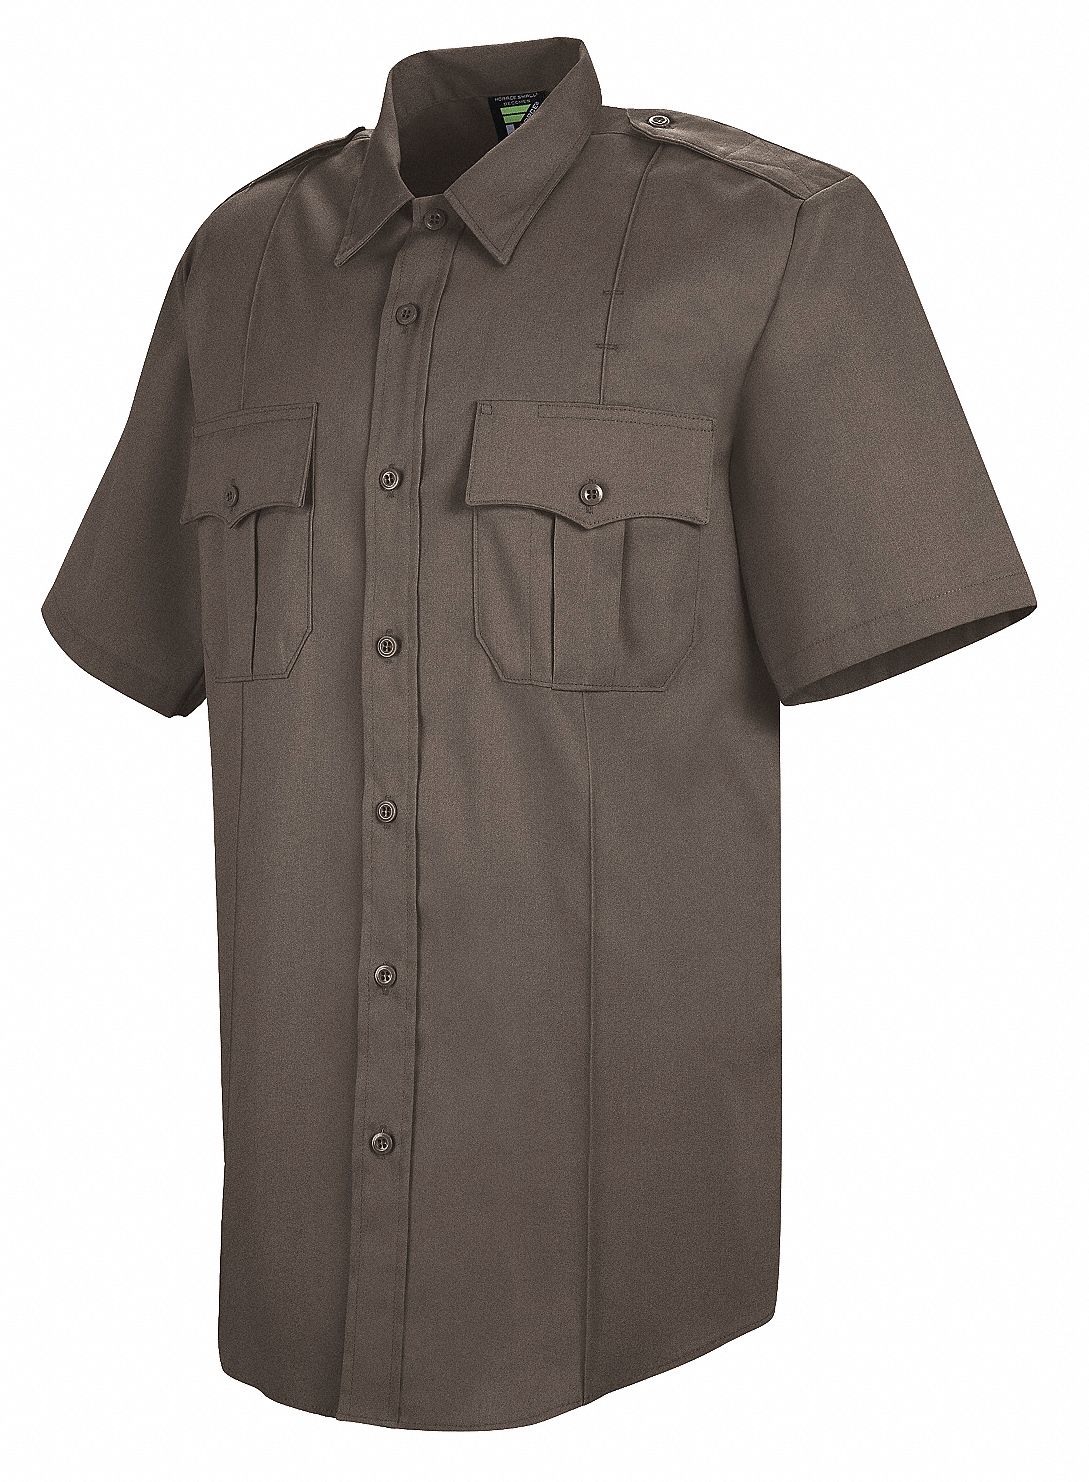 SS205 Brown Horace Small Sentry Plus Shirt